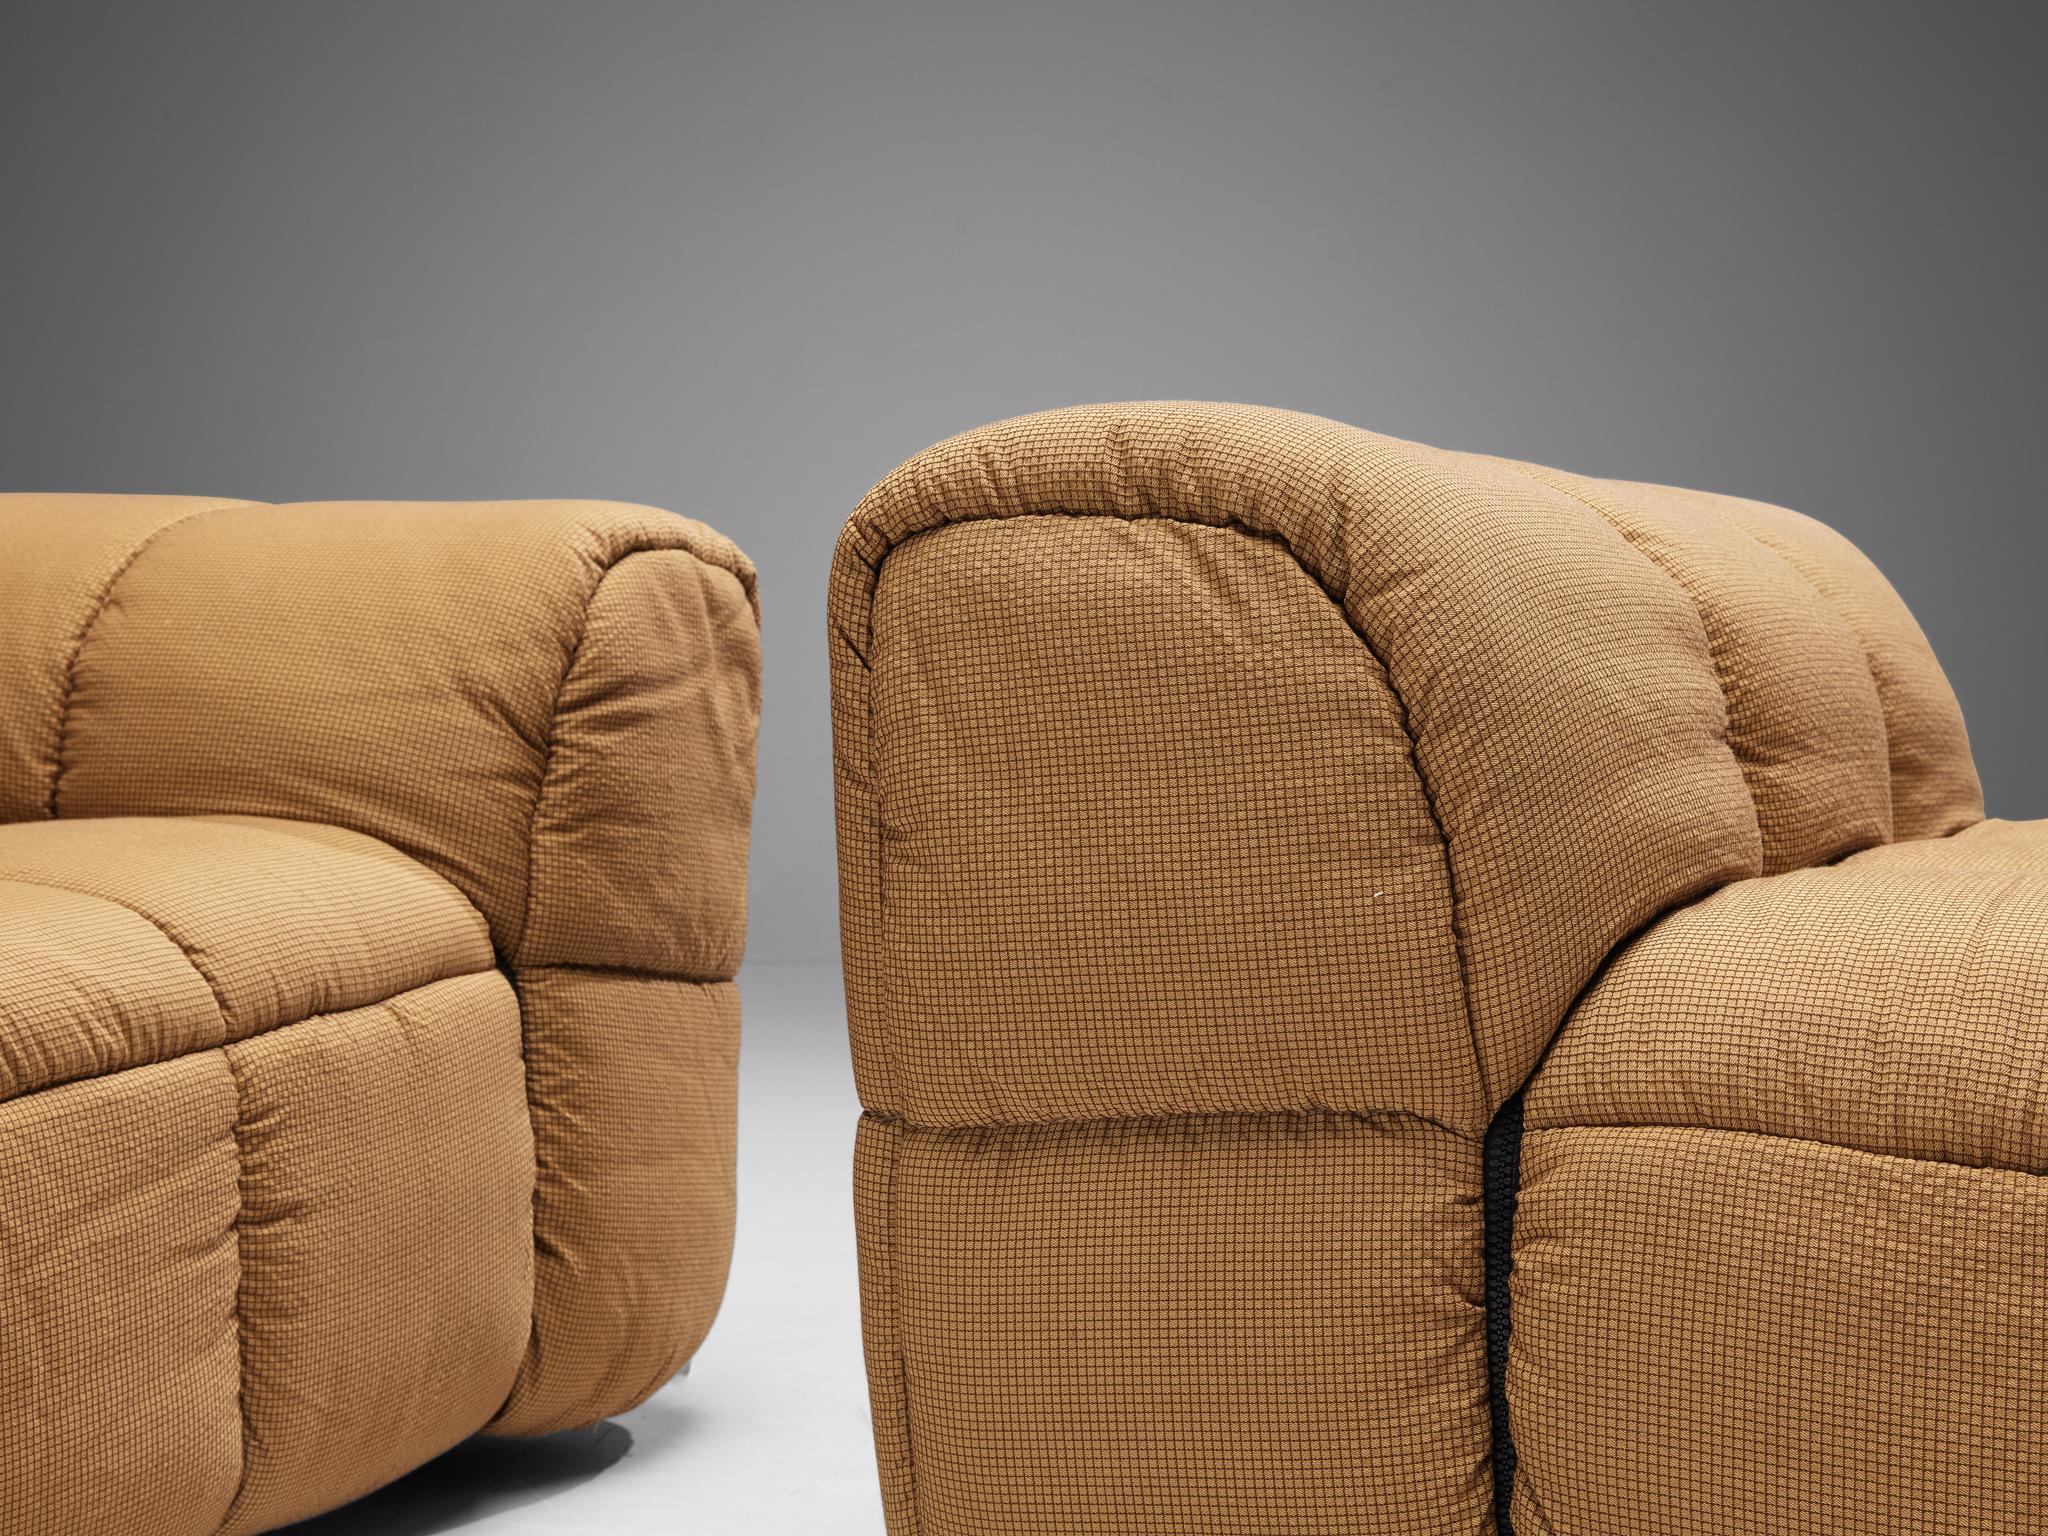 Fabric Cini Boeri for Arflex Modular 'Strips' Pair of Two-Seater Elements